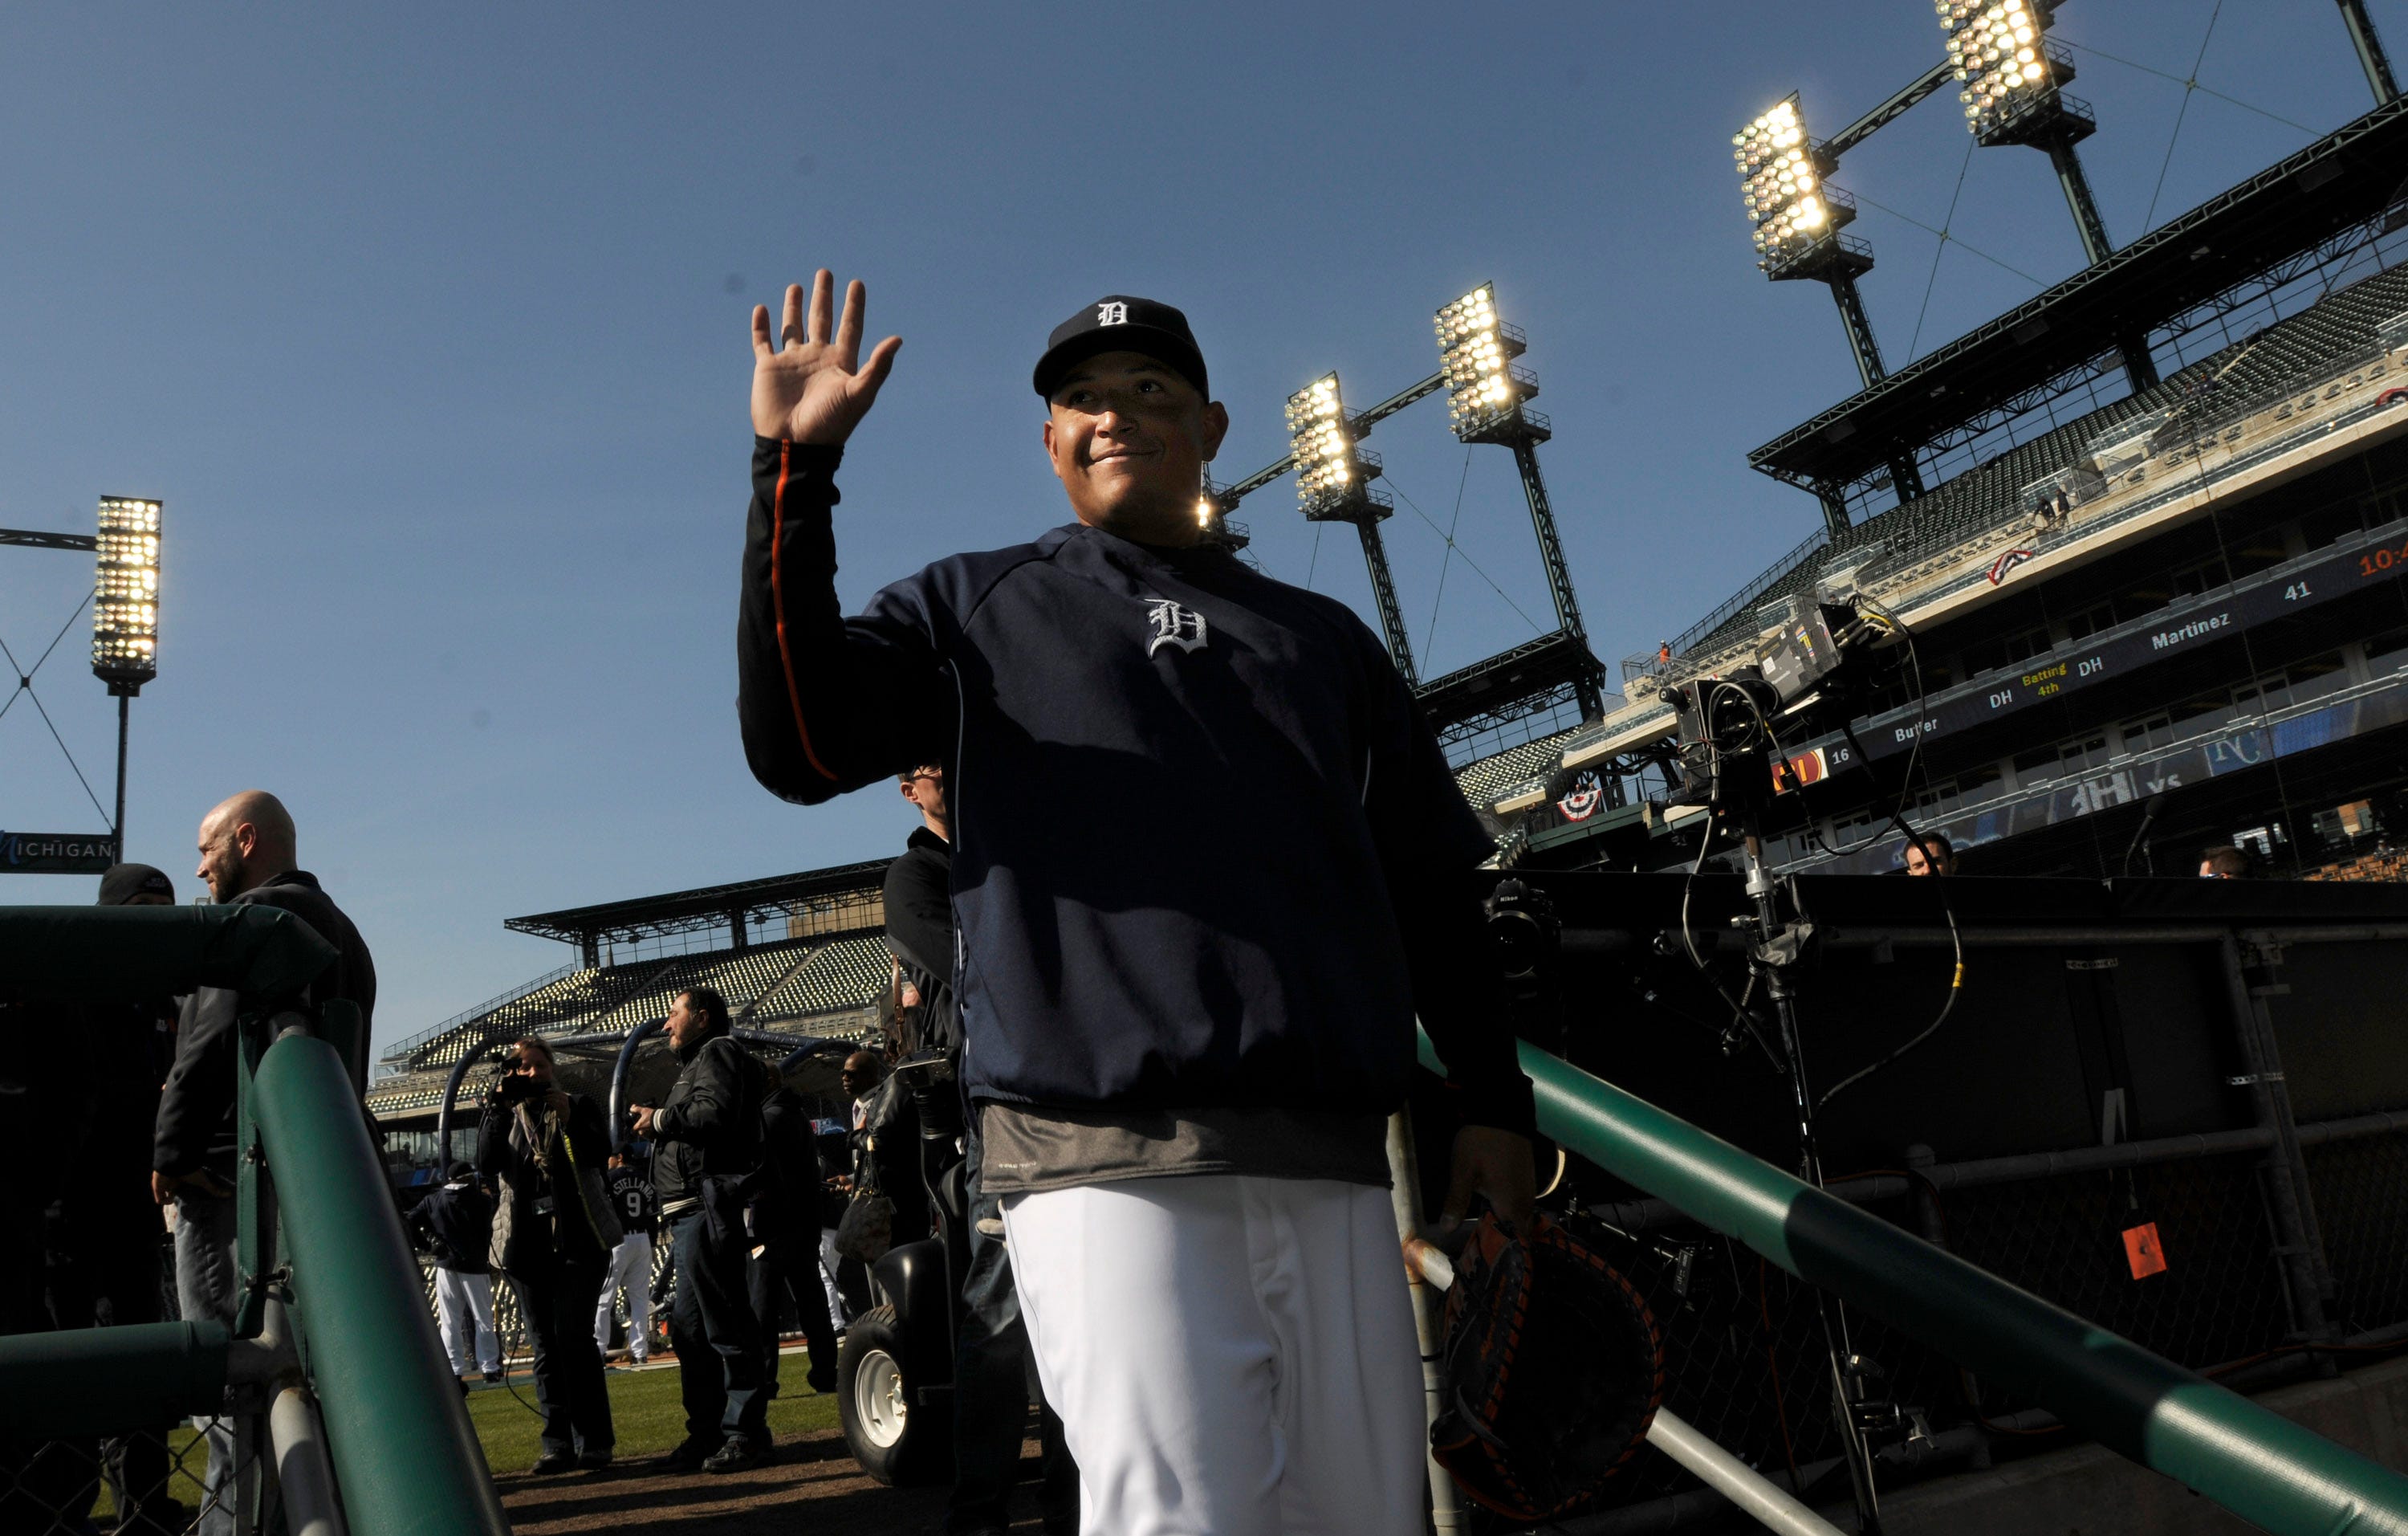 Tigers' Miguel Cabrera waves to the crowd after batting practice on Monday, March 31, 2014. Photos of Detroit Tigers Opening Day on Monday, March 31, 2014 at Comerica Park in Detroit.